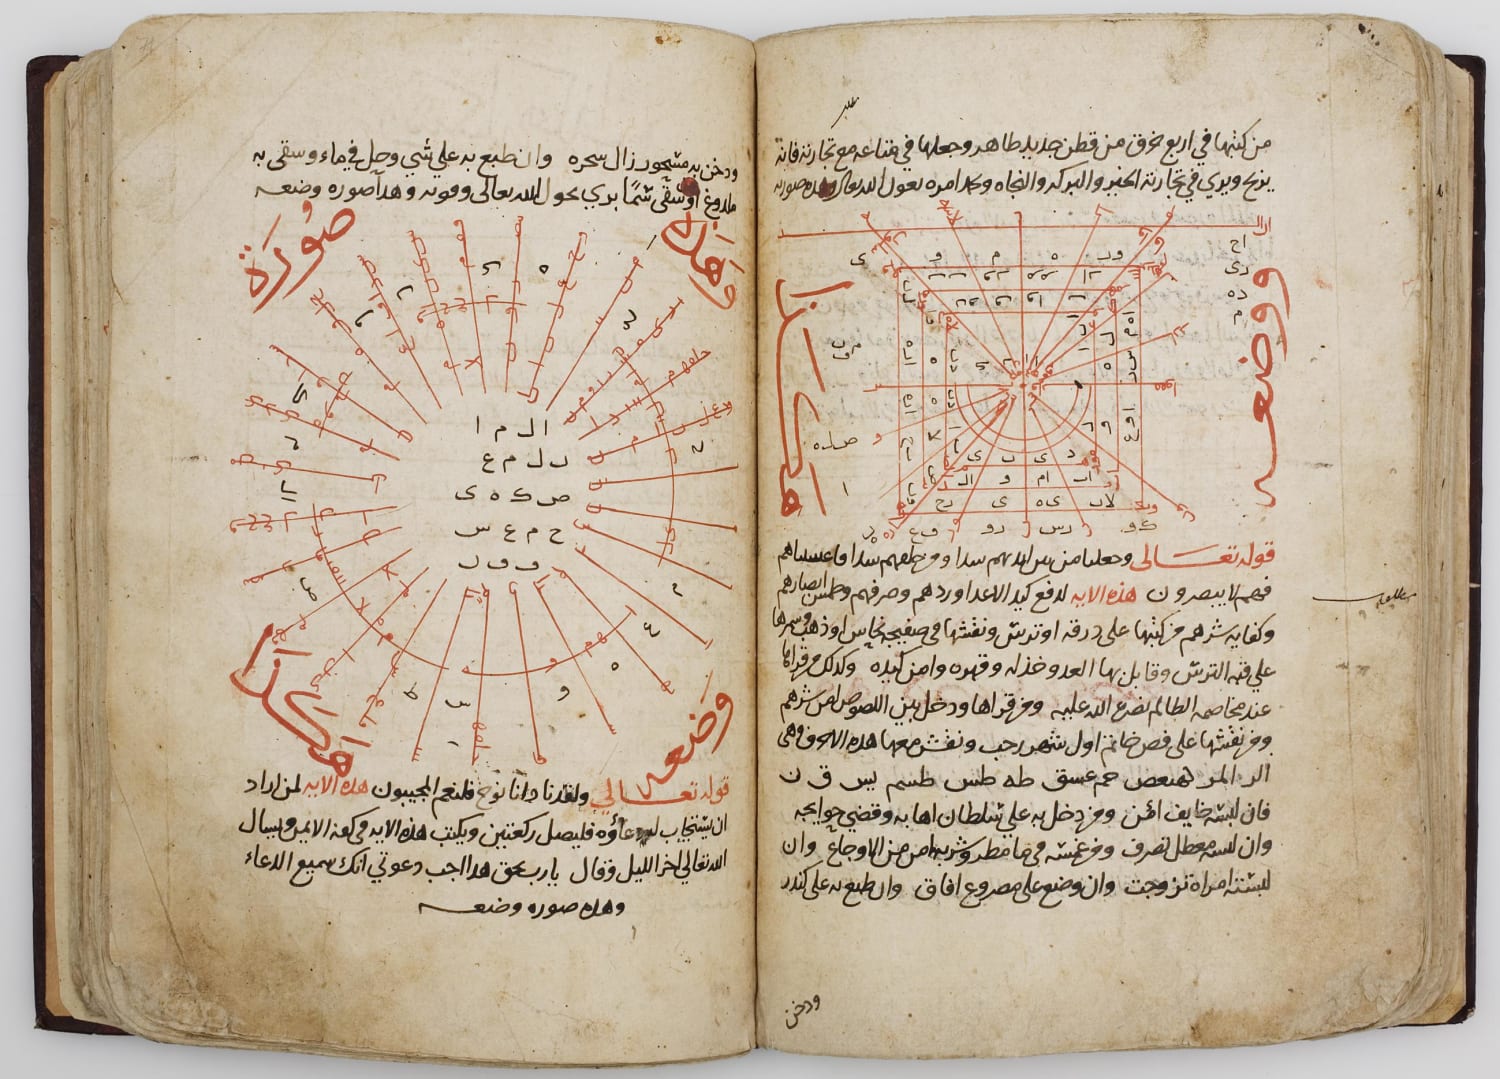 A book of magic, with spells and occult diagrams involving the 99 names of God. Middle East, 1425